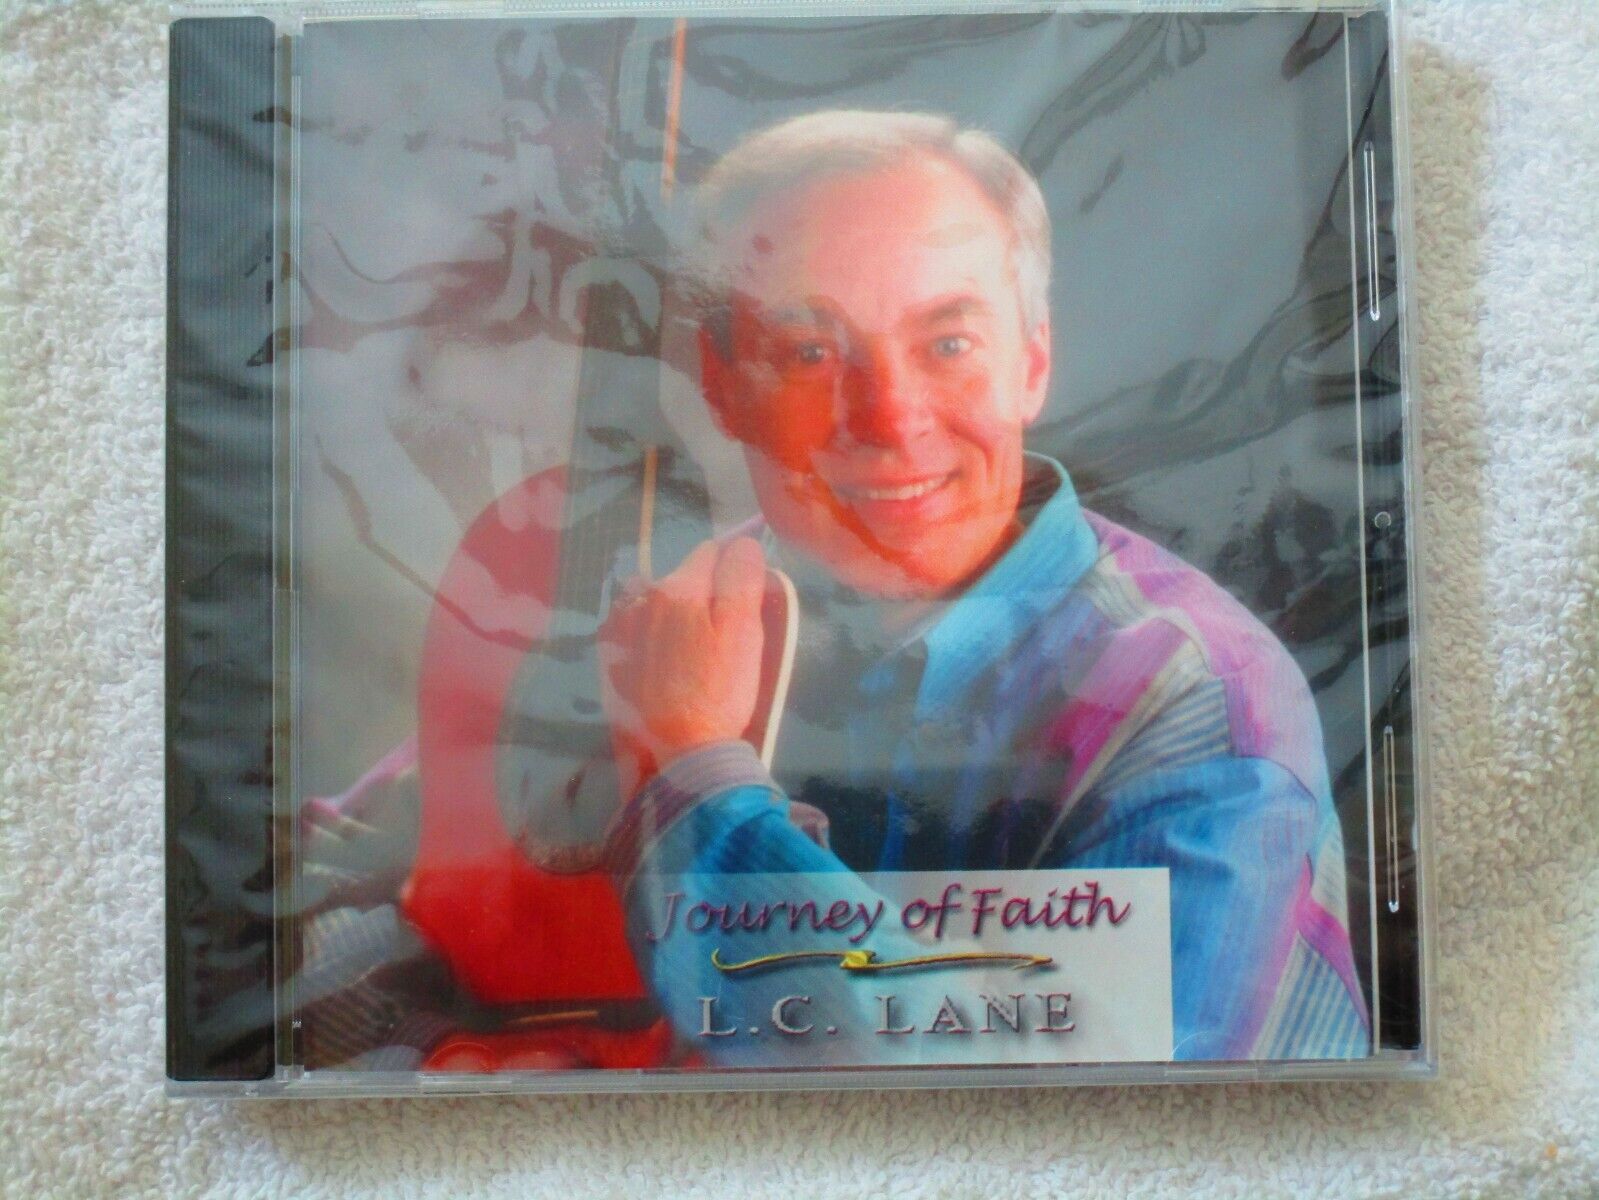 Journey of Faith CD by L. C. Lane (Lamp Music Group) 